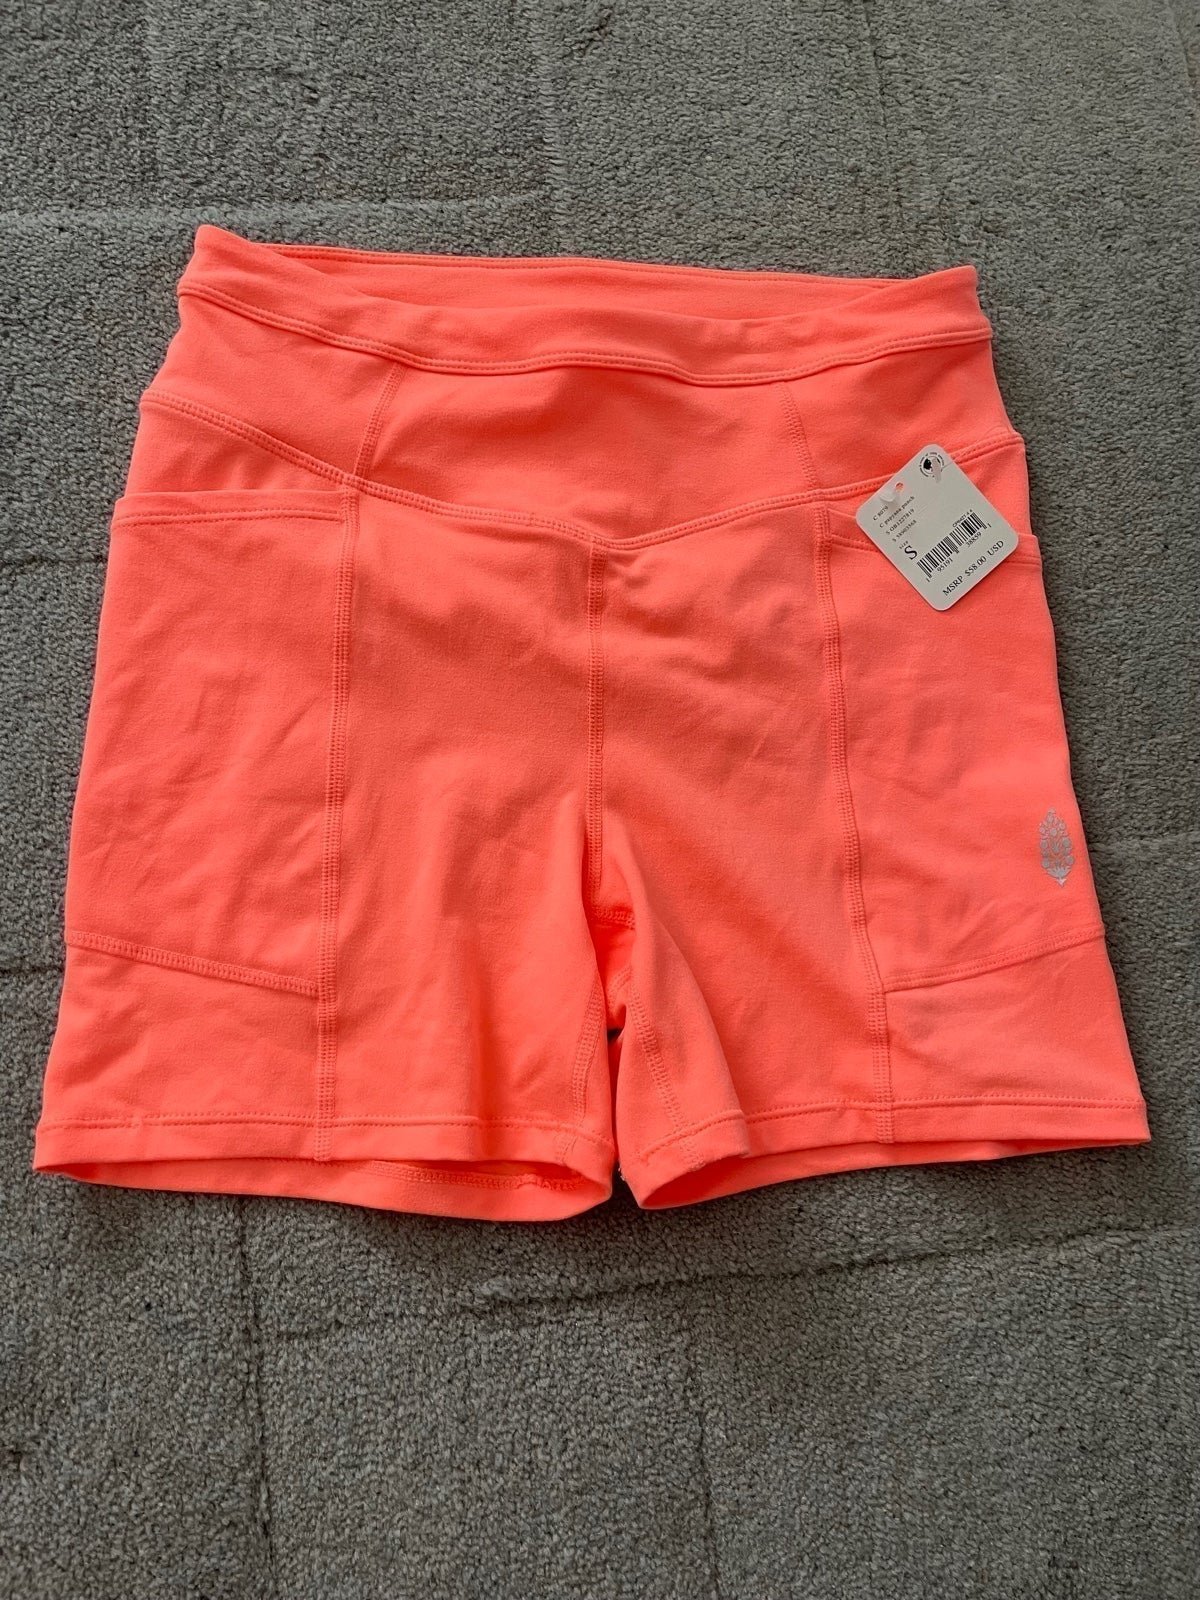 Factory Direct  NWT $60 Free people movement Shorts sz S high waisted super cute! nMoDwaTq1 Online Exclusive